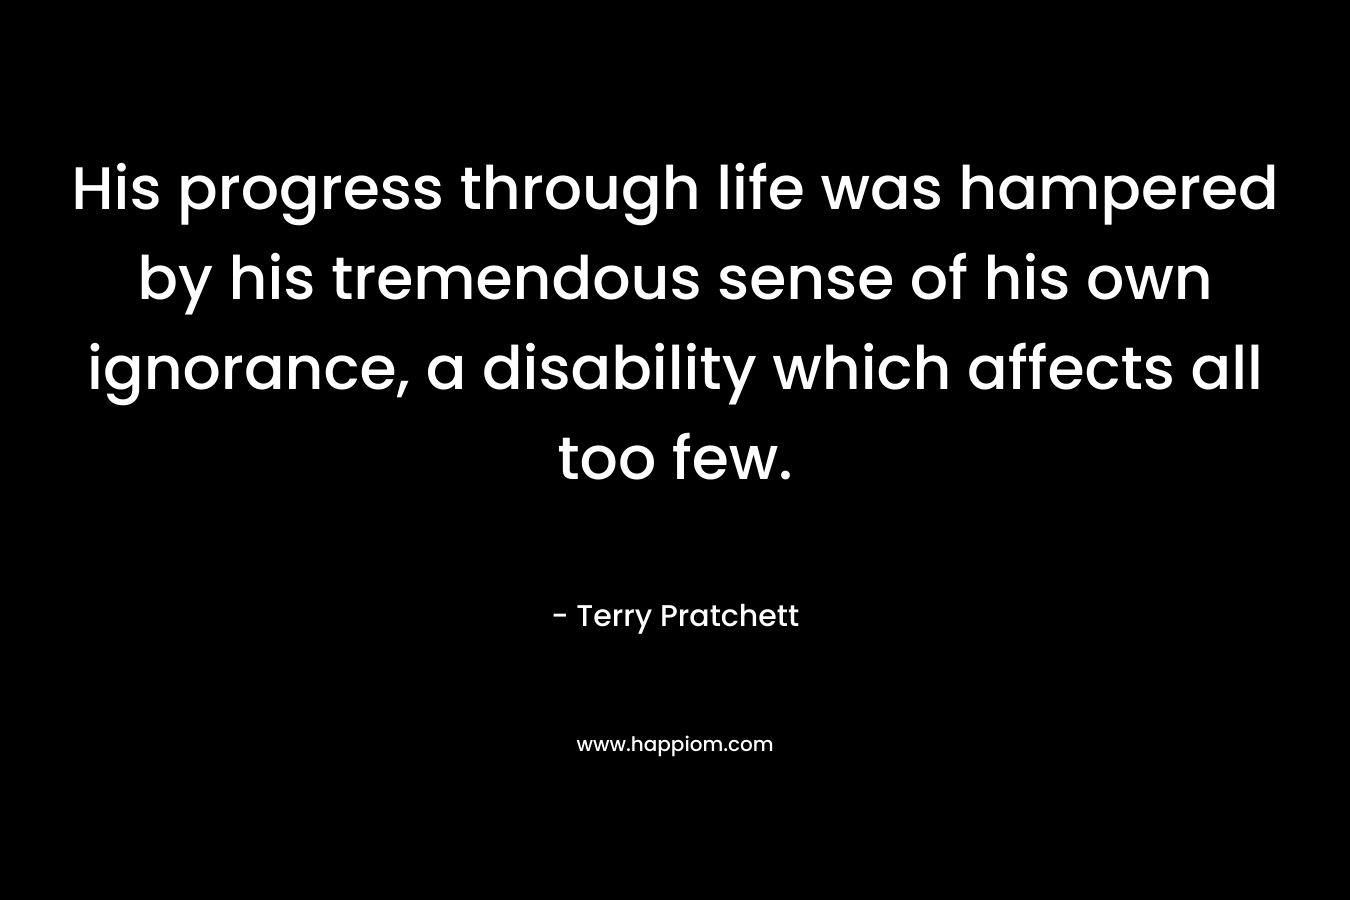 His progress through life was hampered by his tremendous sense of his own ignorance, a disability which affects all too few. – Terry Pratchett